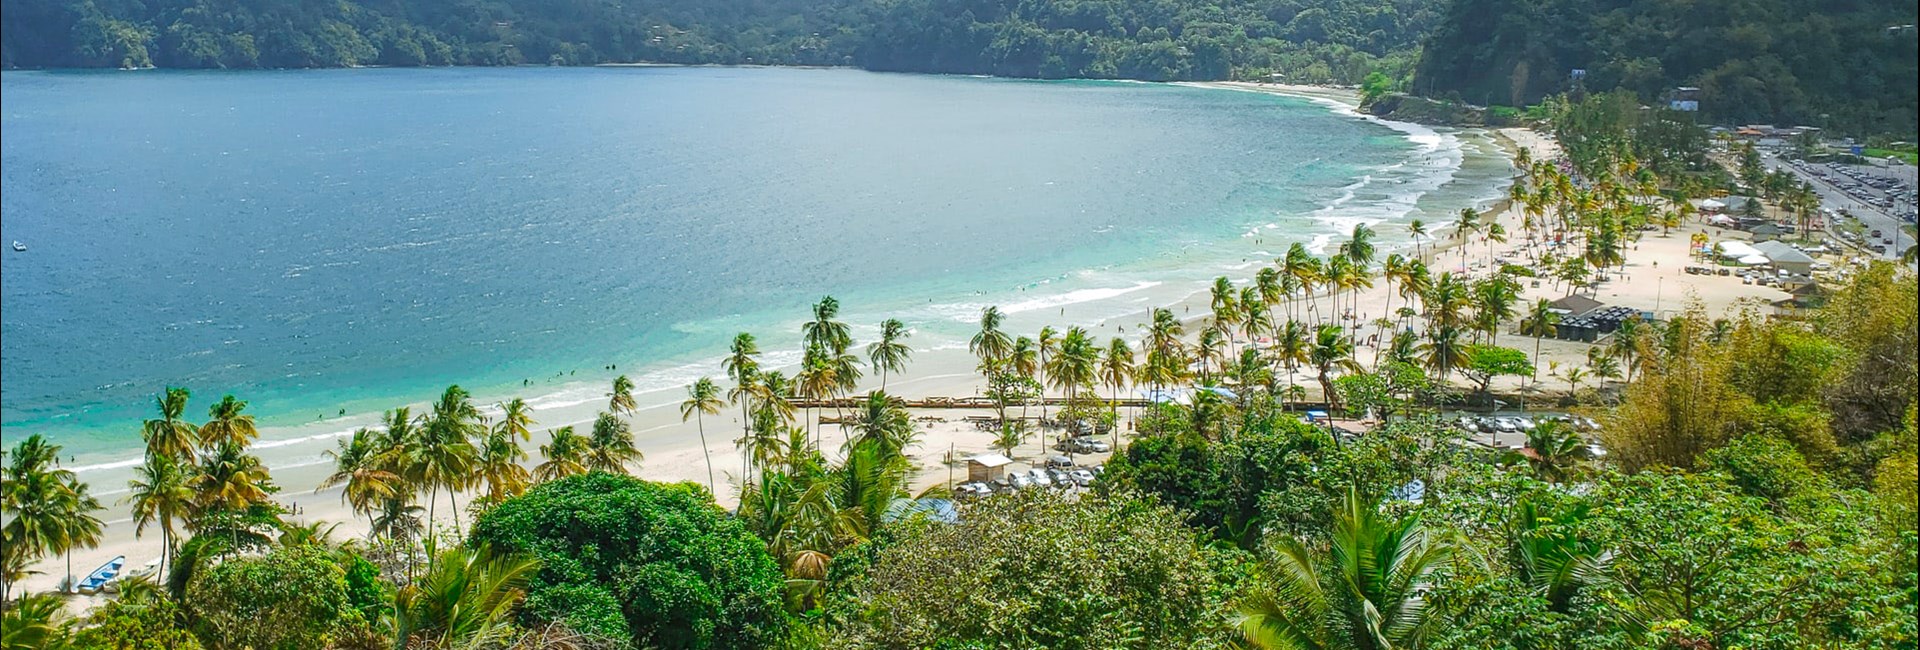 White sand beach cove backed by tall palm trees and tree covered mountains